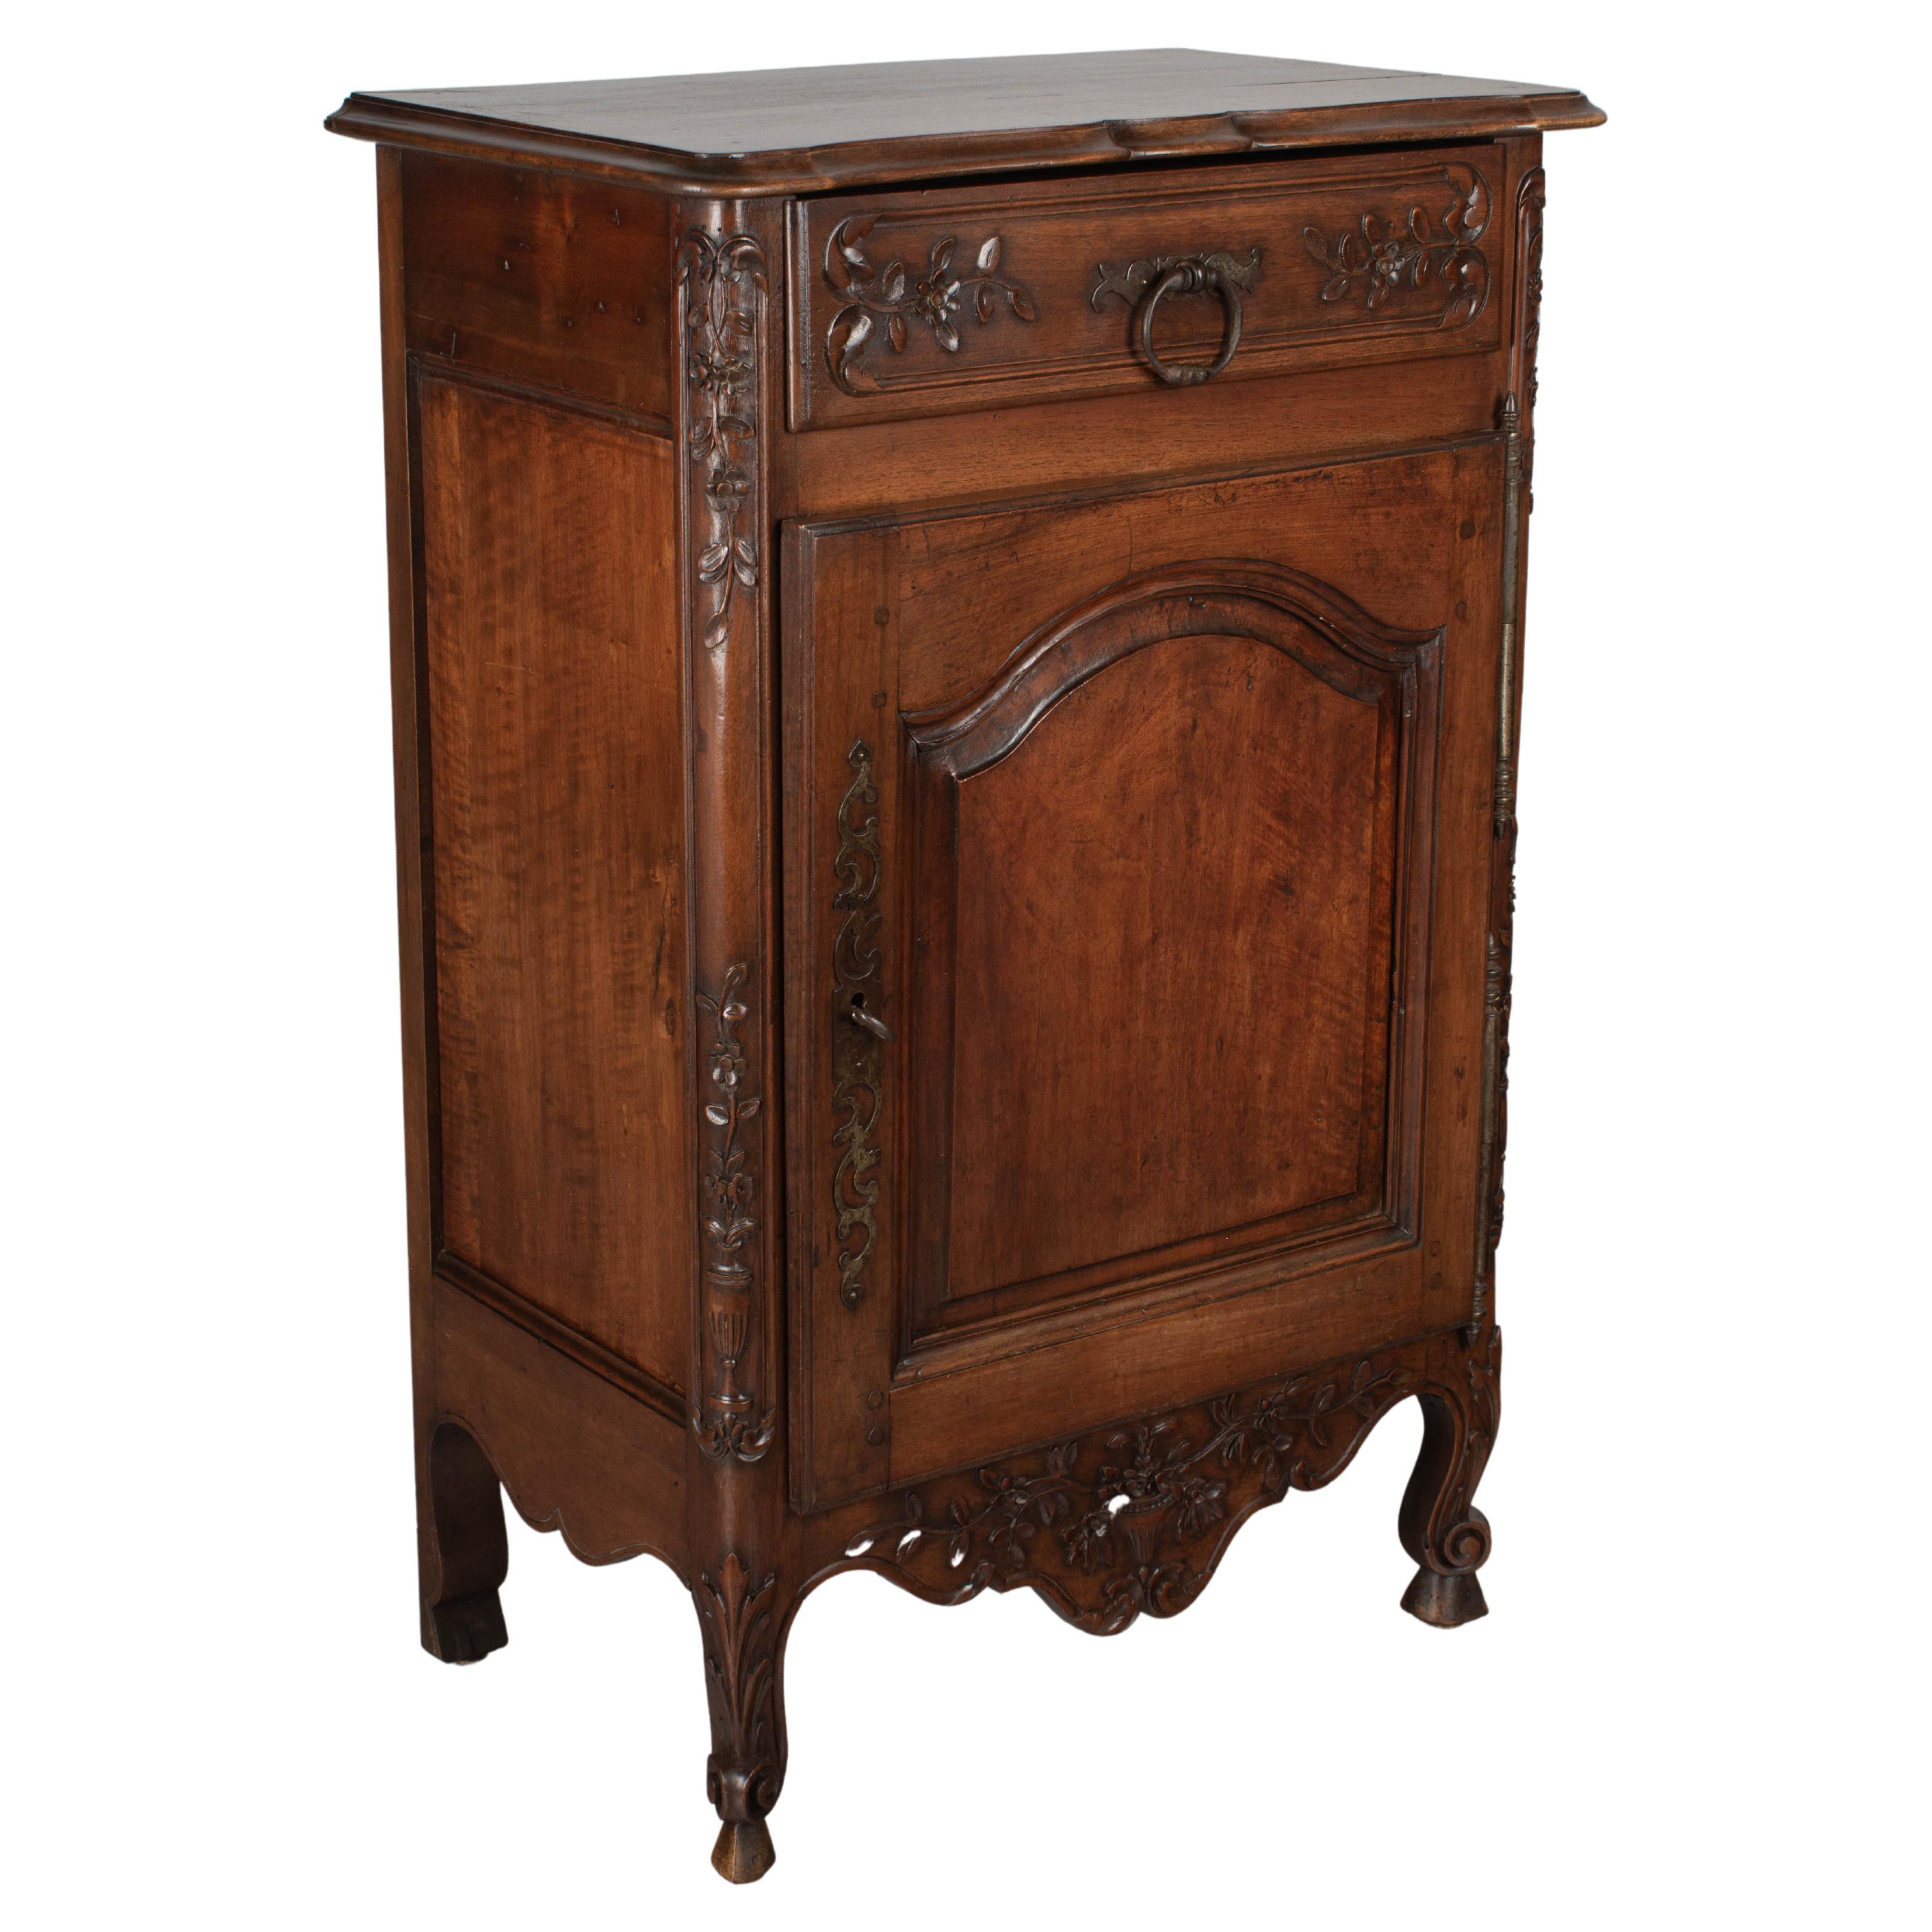 19th Century French Louis XV Style Confiturier or Single Door Cabinet